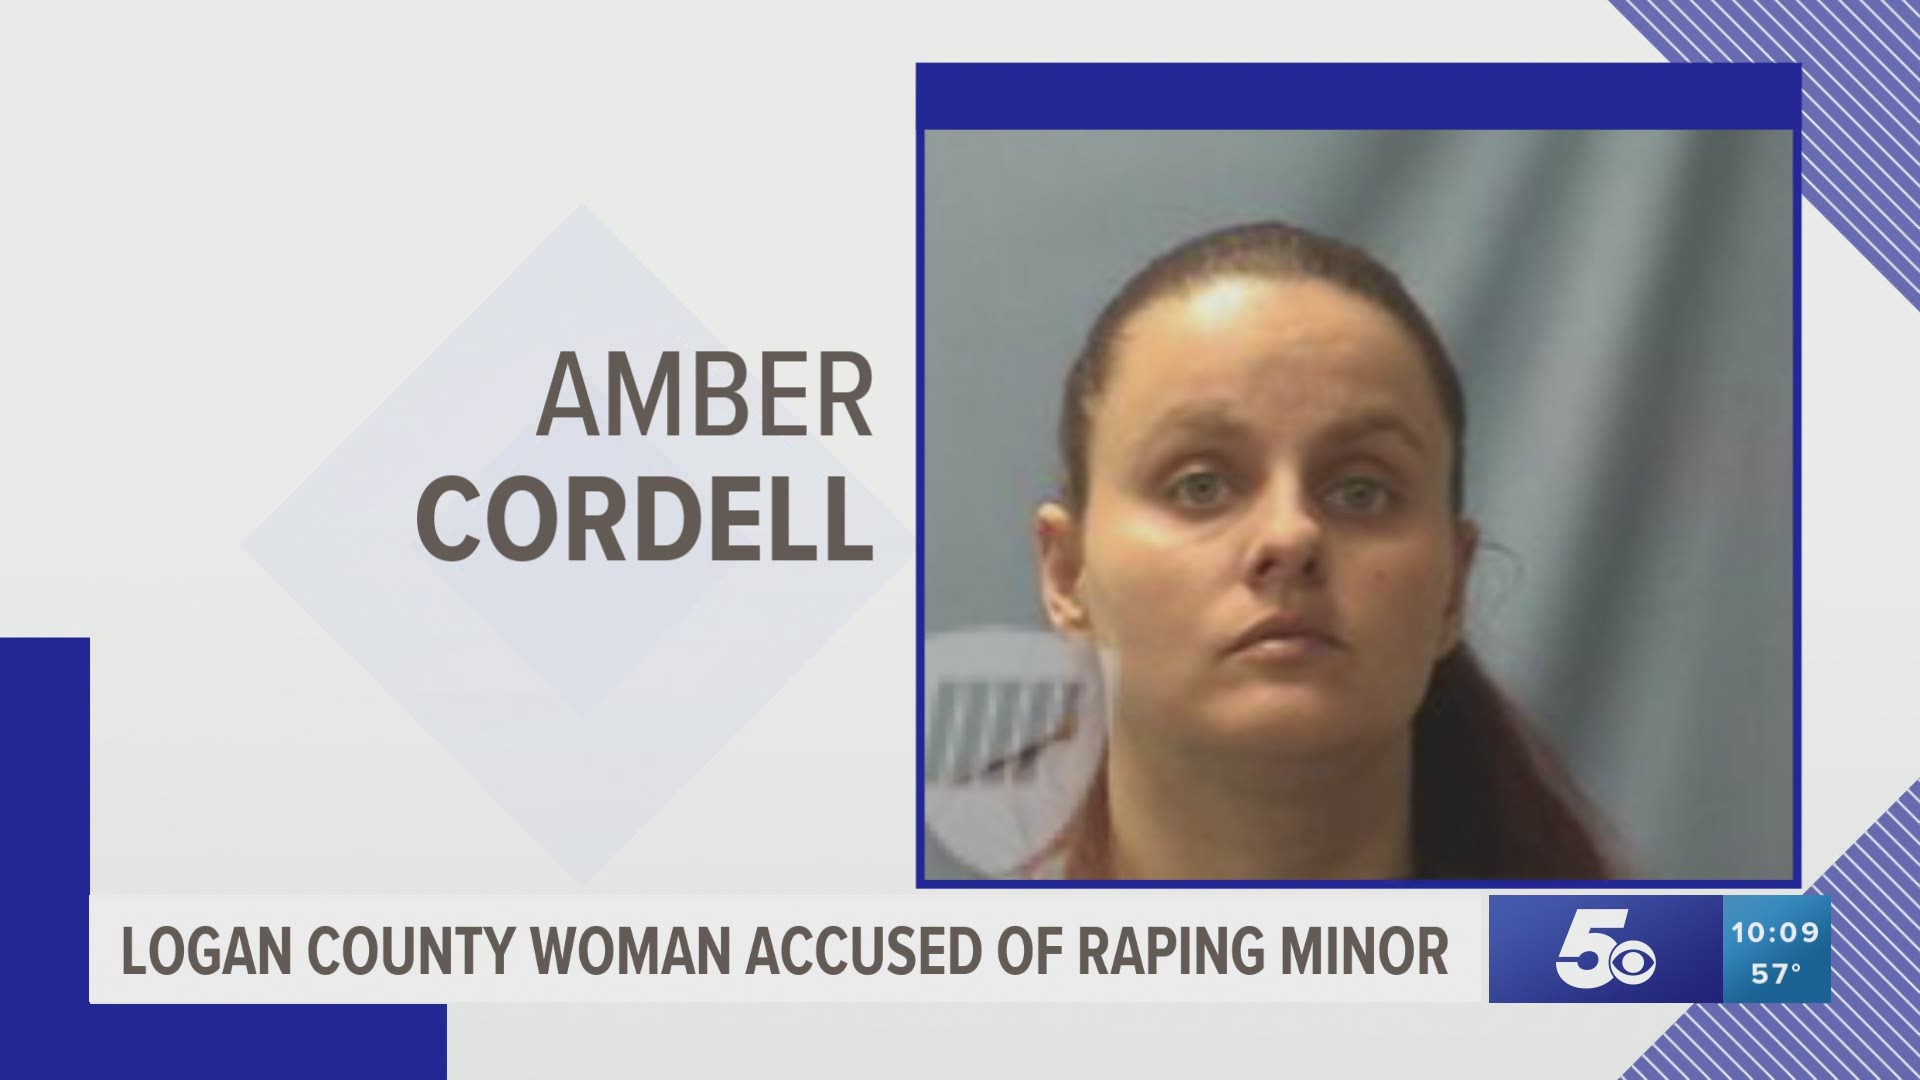 Amber Cordell, 31, is being held on a $250K bond and is accused of raping and sexually grooming a 14-year-old minor.